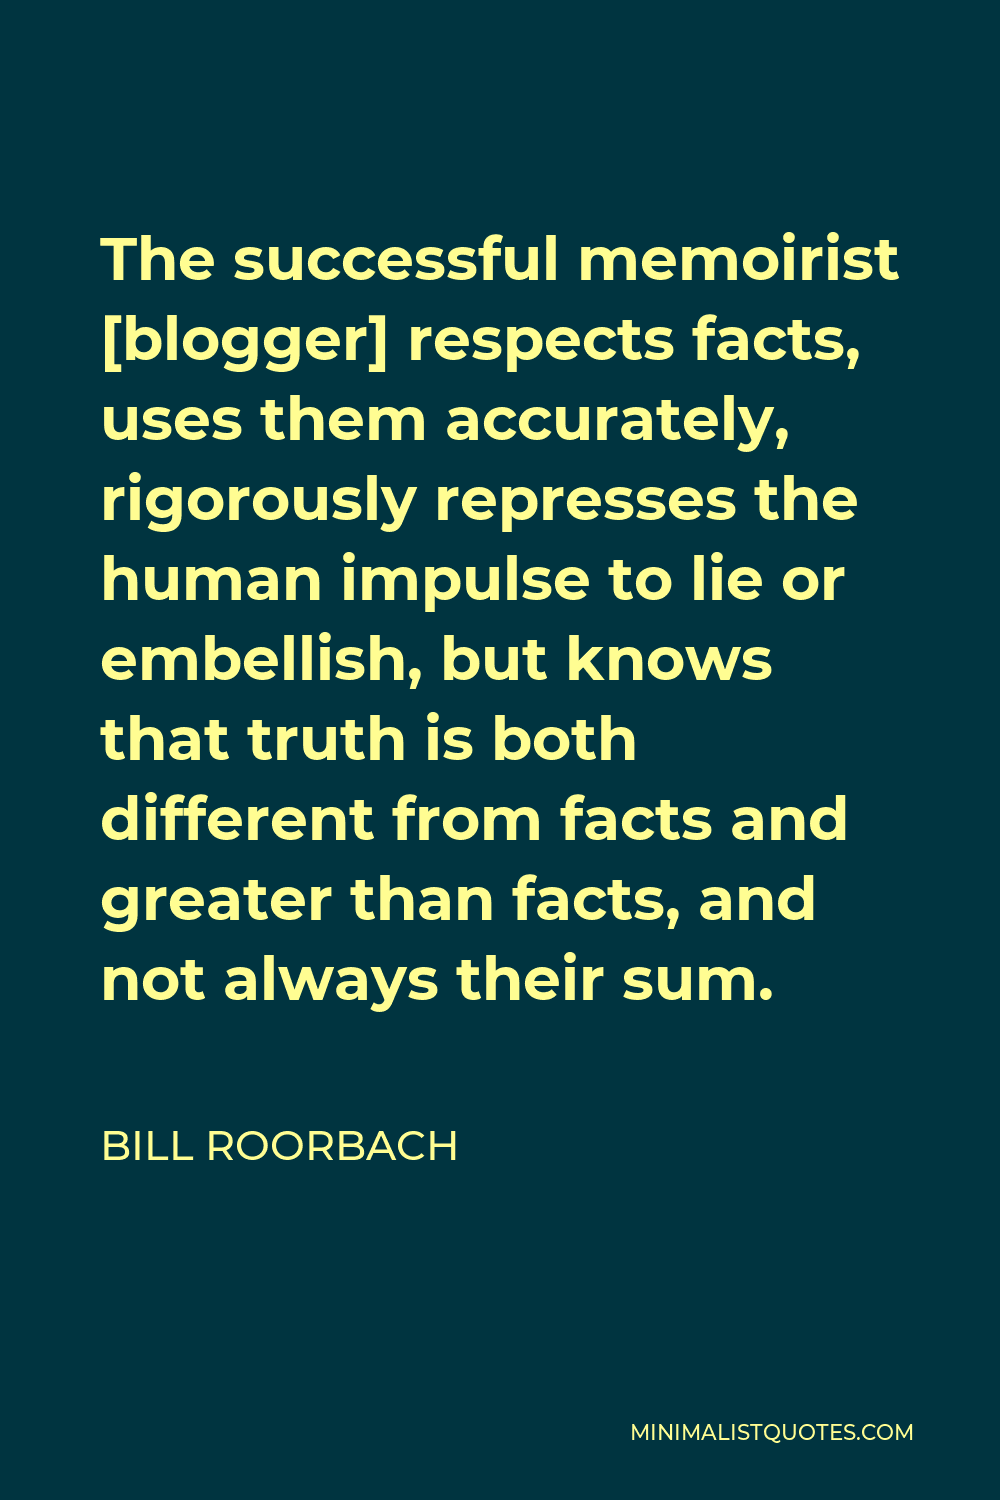 Bill Roorbach Quote - The successful memoirist [blogger] respects facts, uses them accurately, rigorously represses the human impulse to lie or embellish, but knows that truth is both different from facts and greater than facts, and not always their sum.